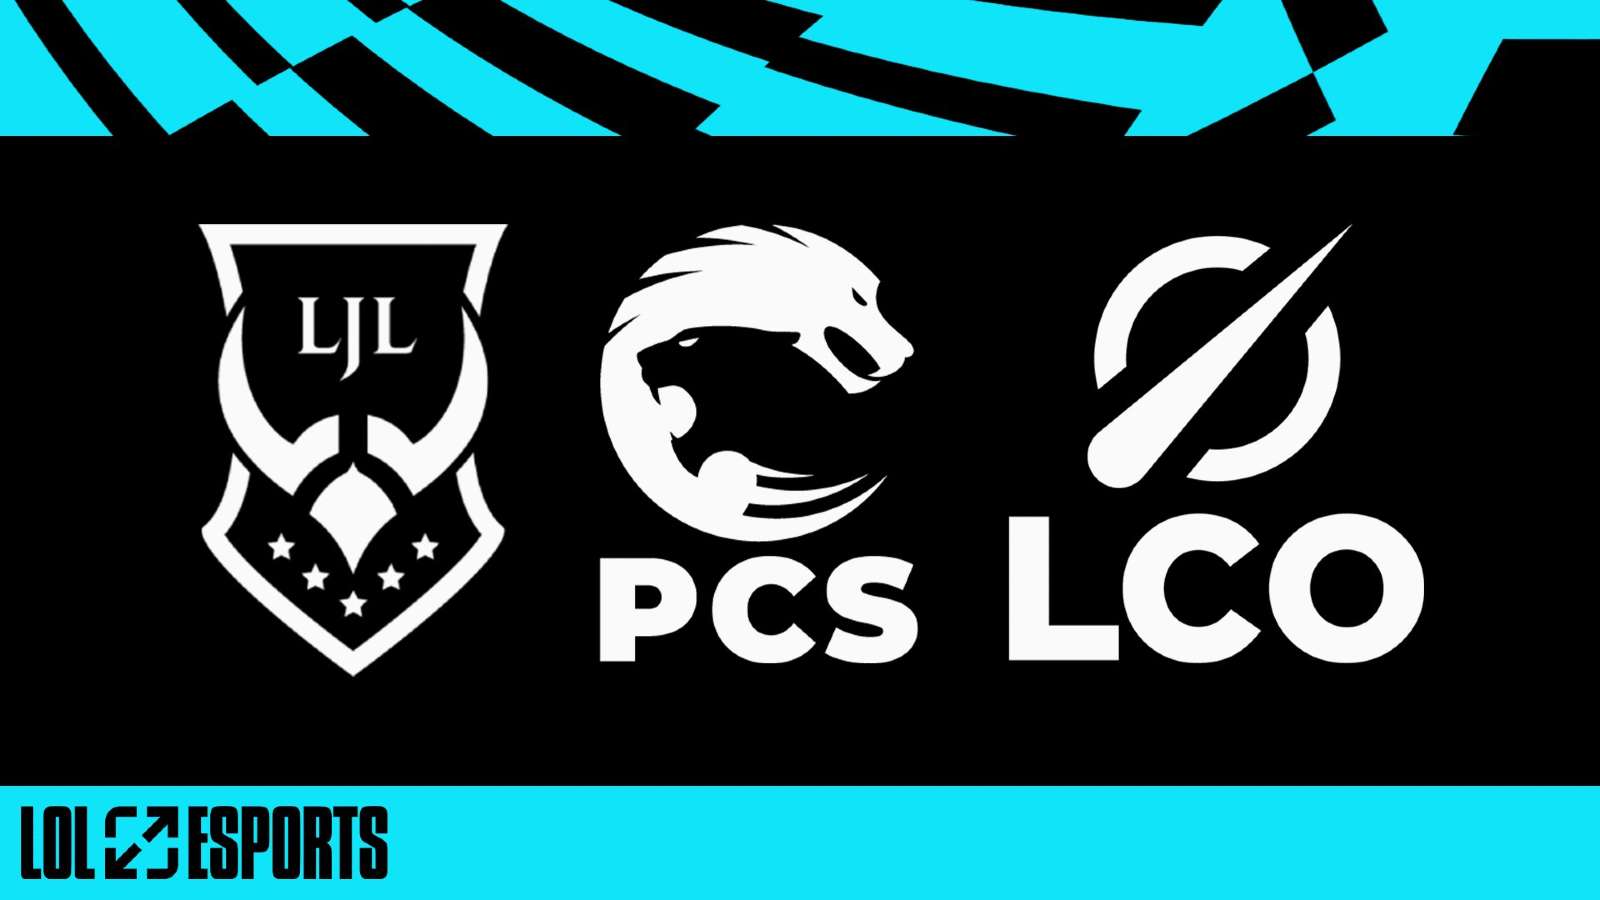 LoL esports announces Japan's LJL will join Oceania in PCS playoffs for  Worlds entry - Dexerto